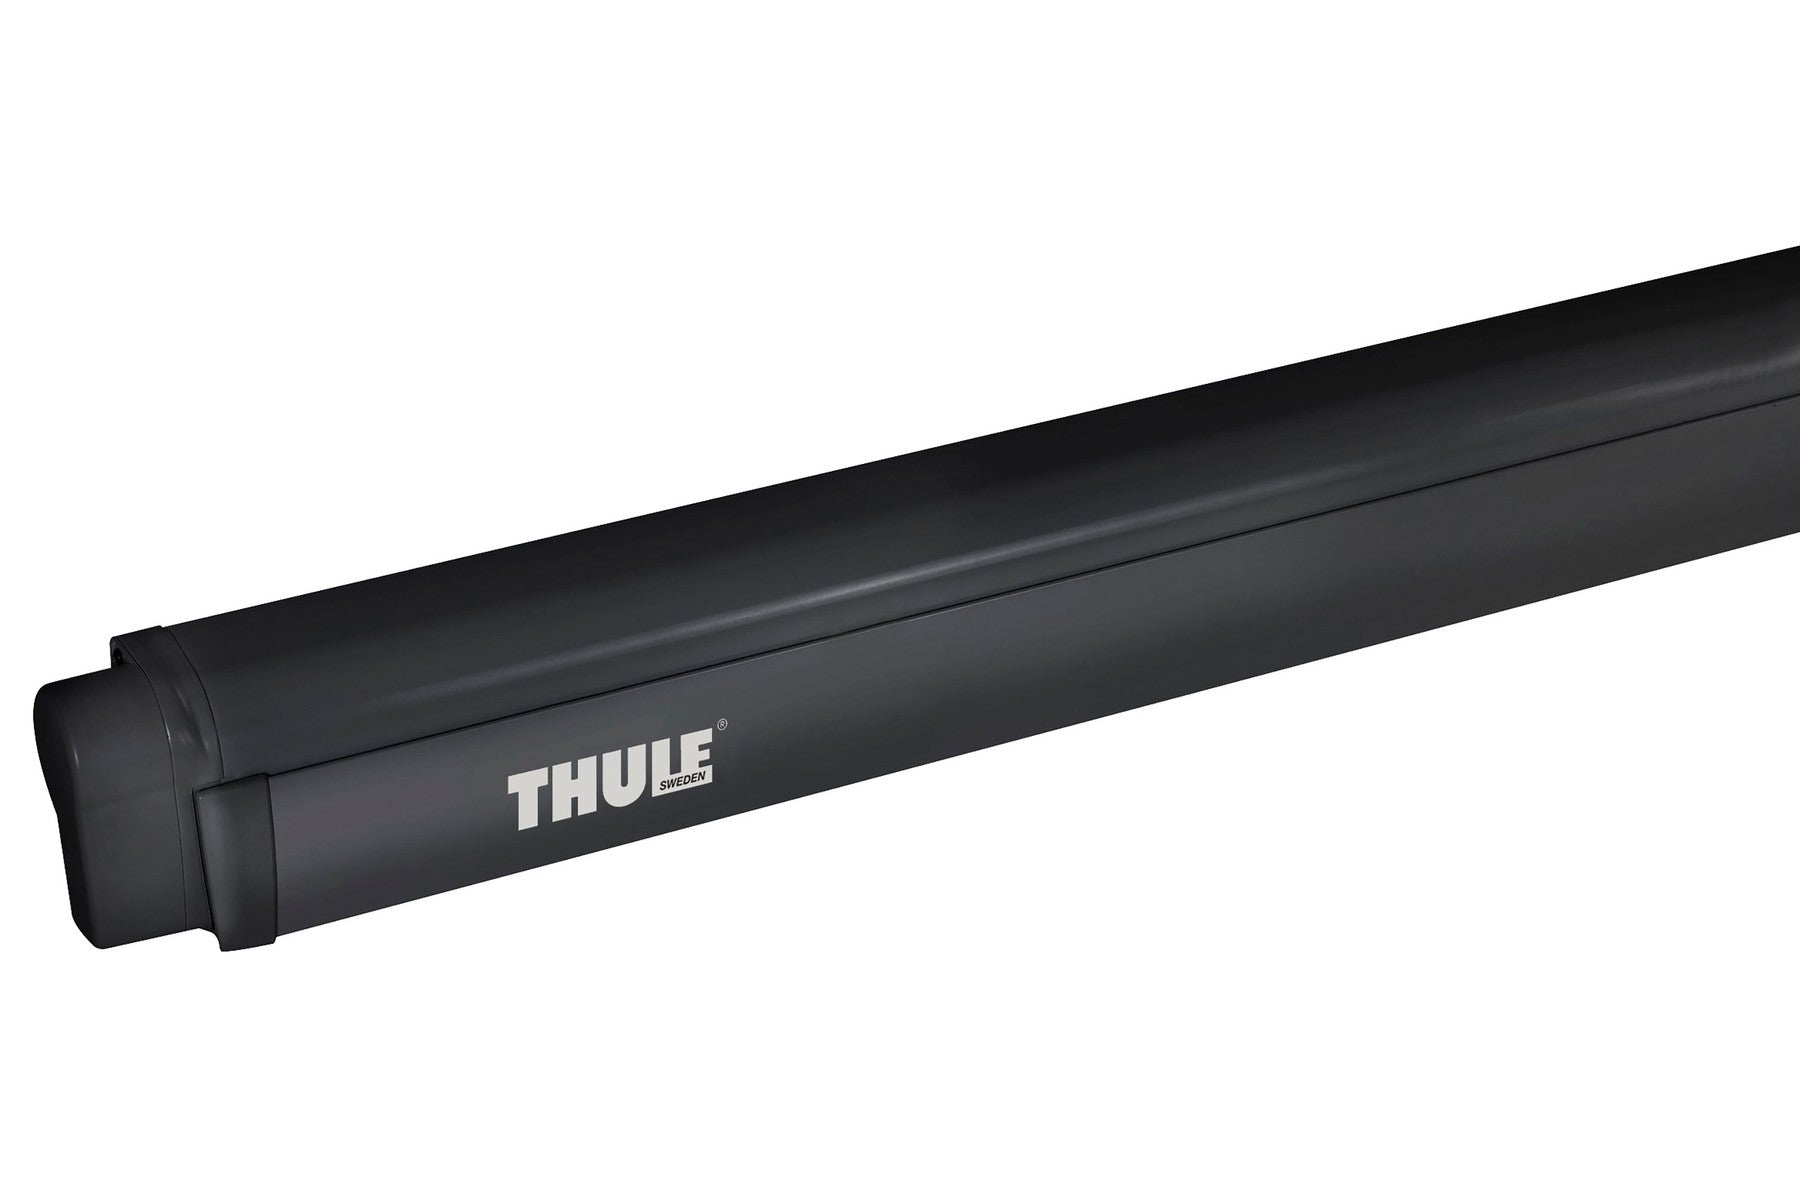 Thule Overcast Awning